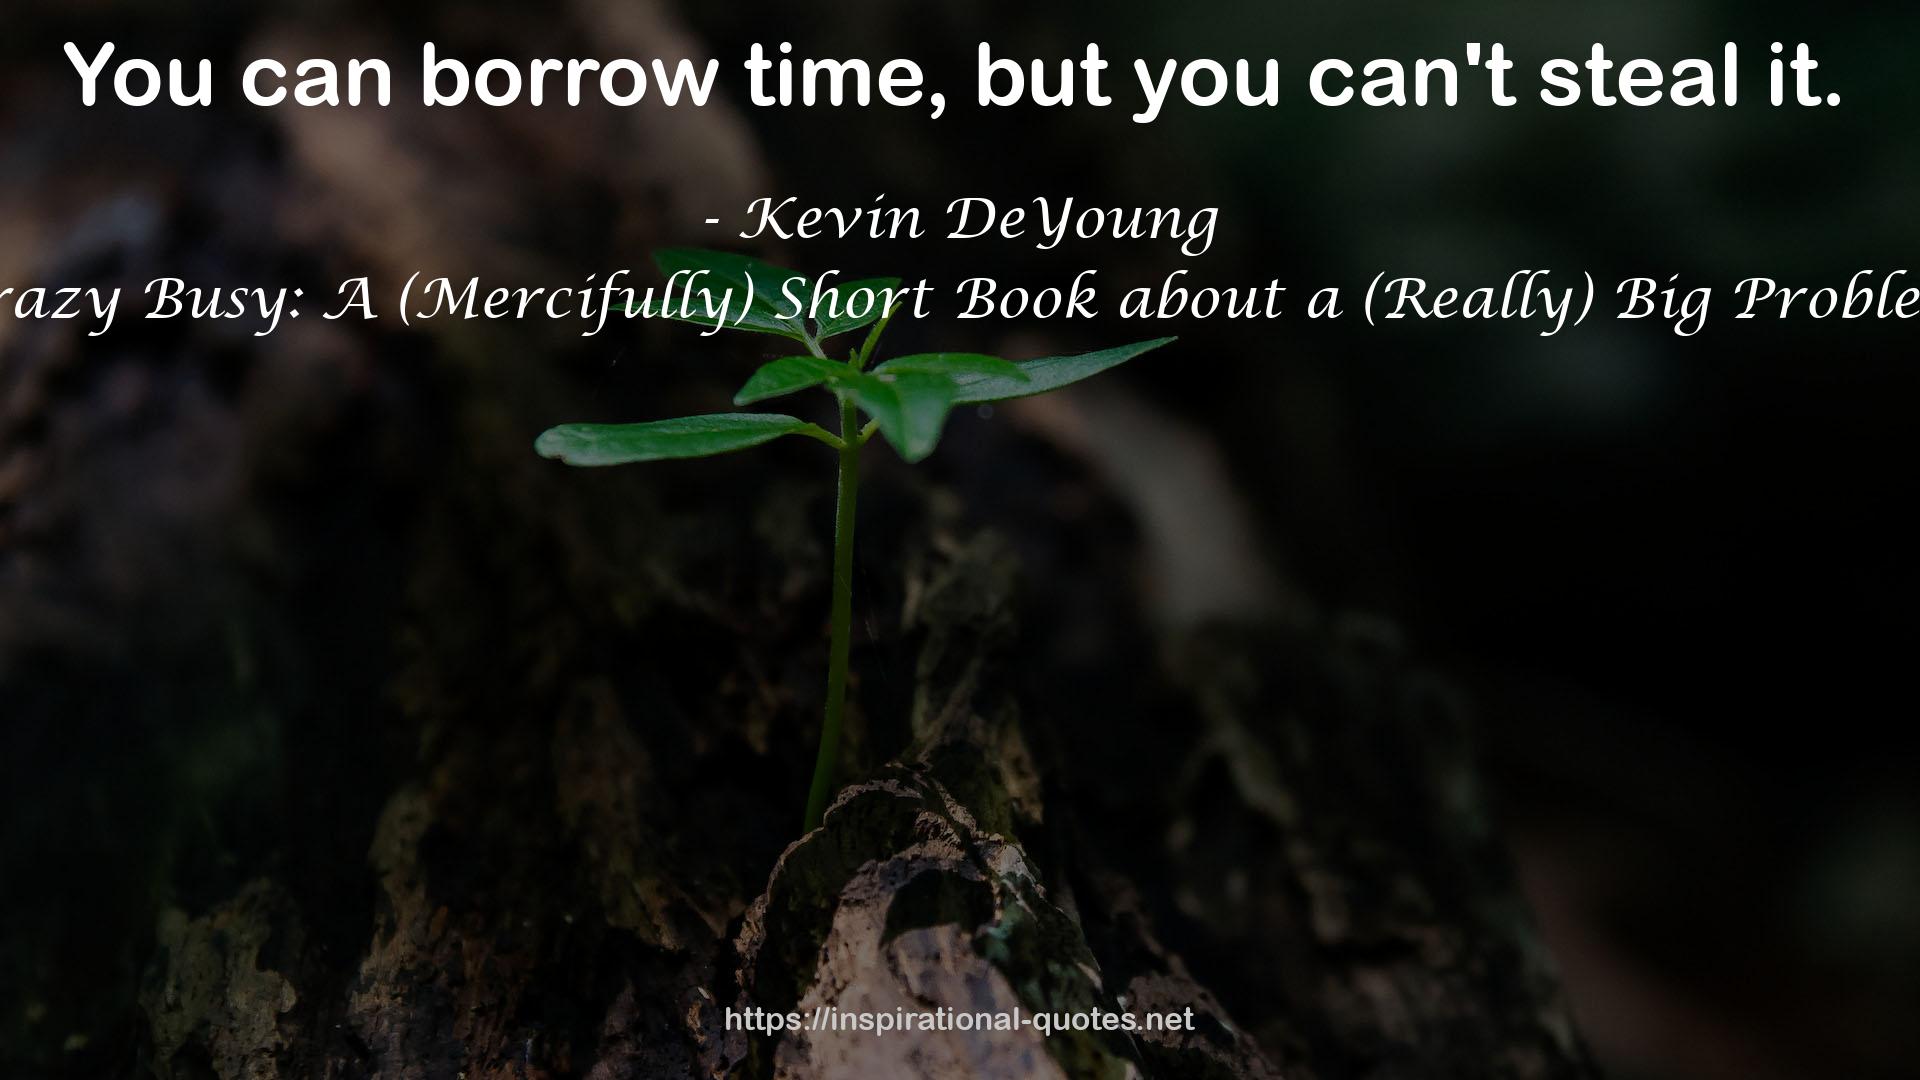 Kevin DeYoung QUOTES